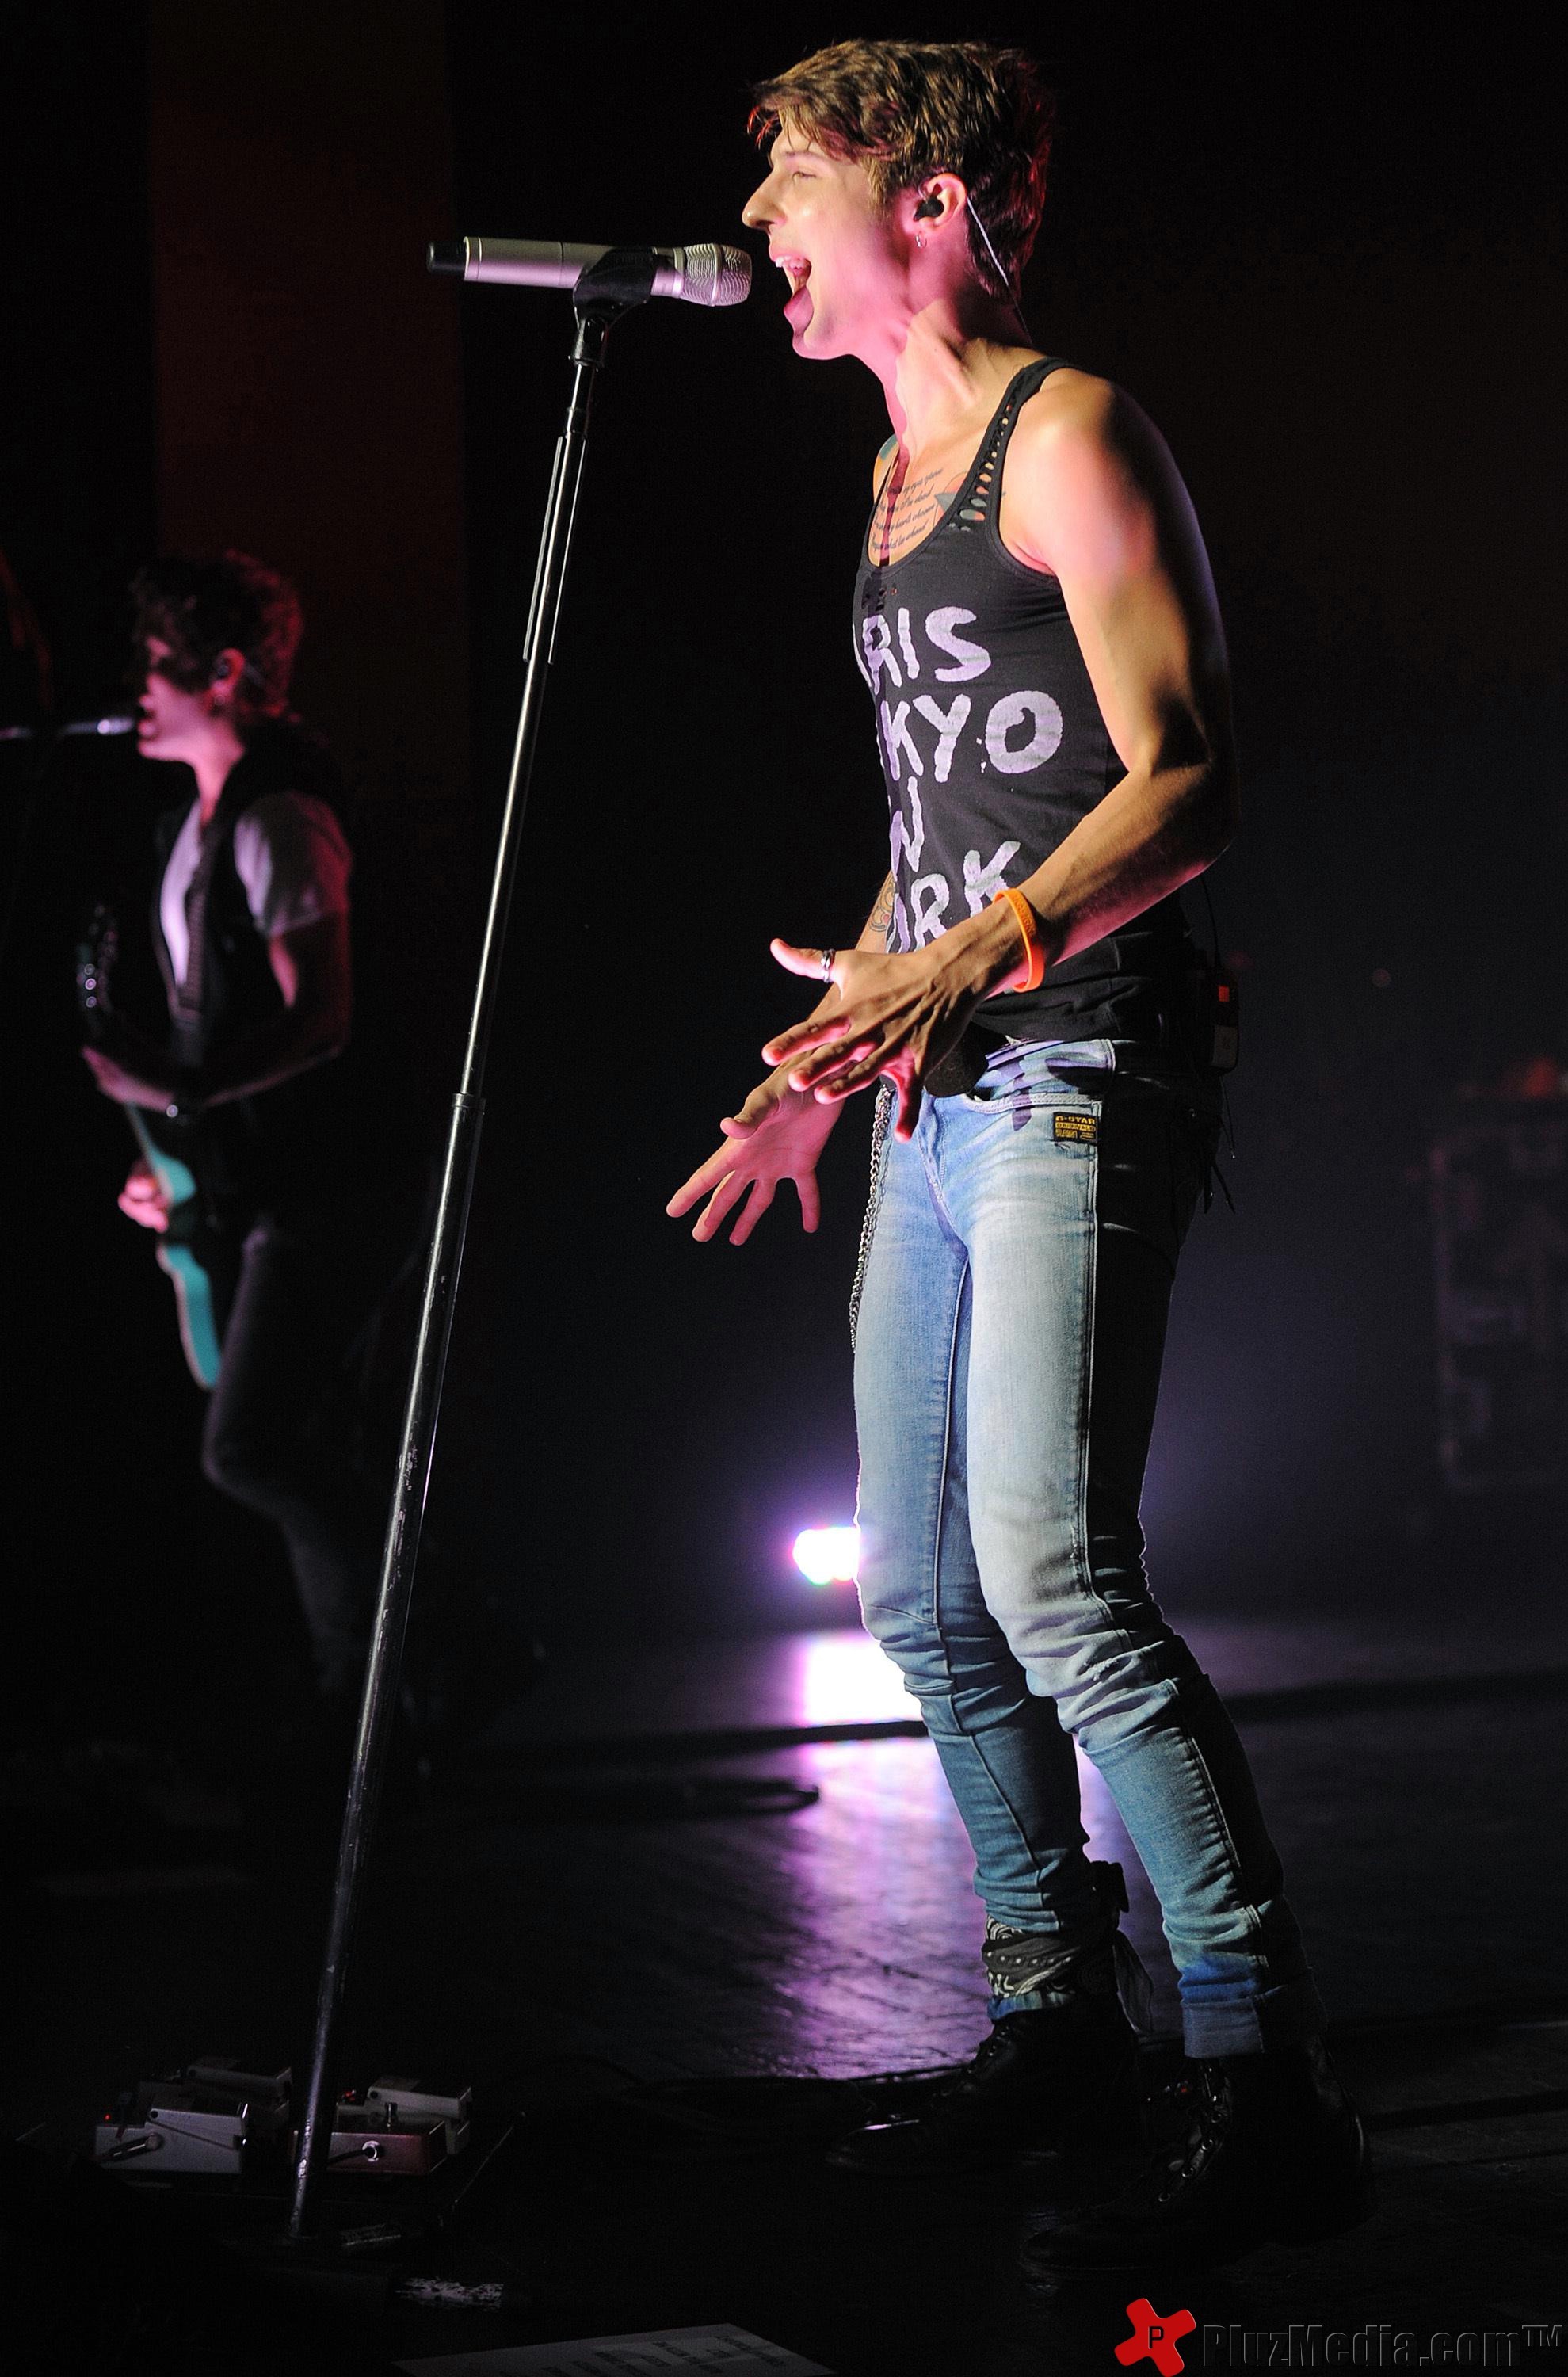 Hot Chelle Rae performing at the Fillmore Miami Beach - Photos | Picture 98303